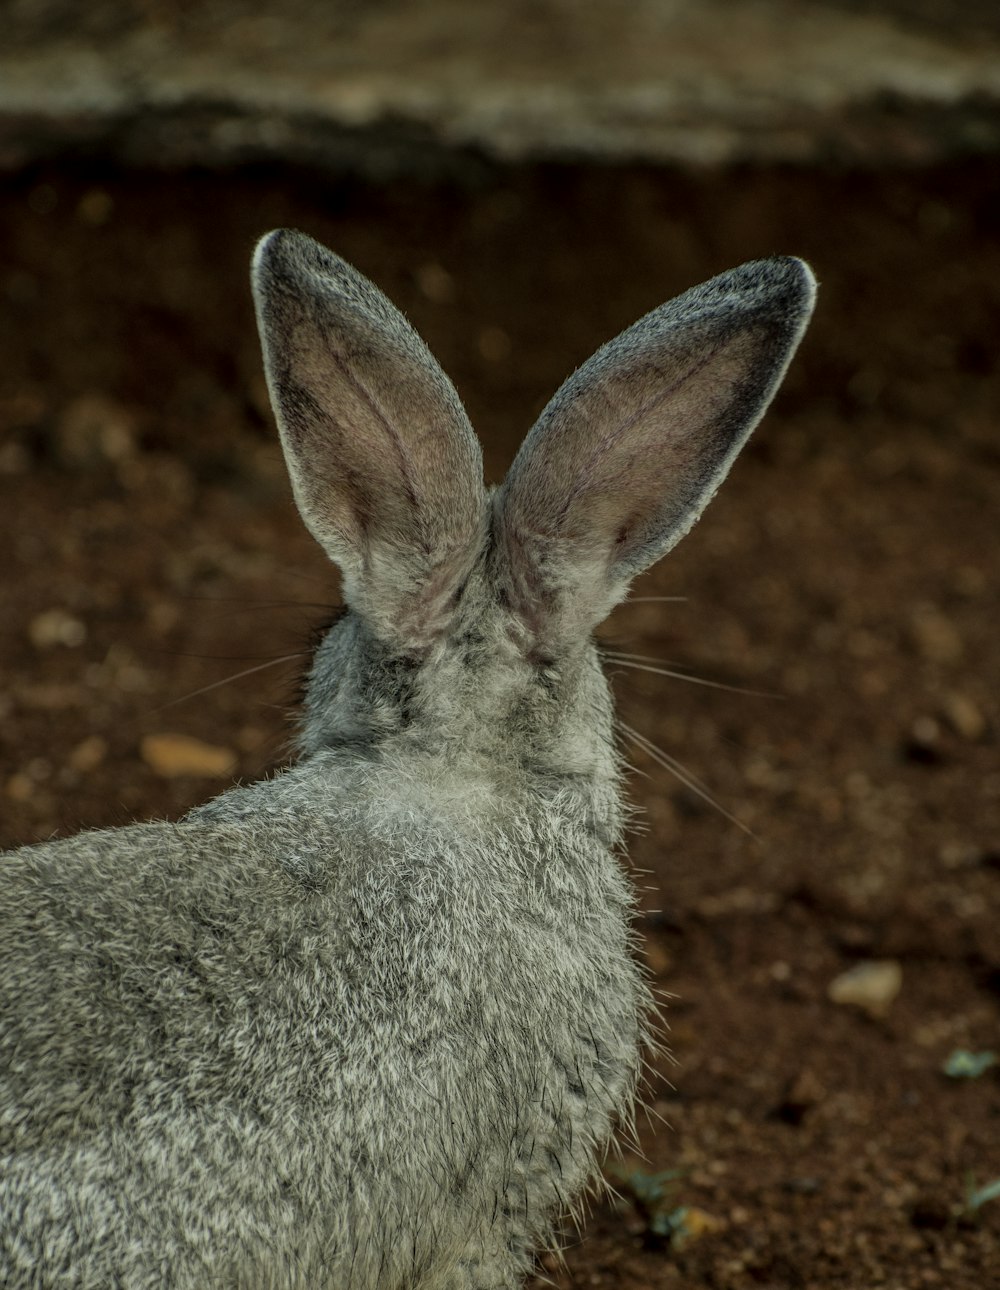 a close up of a rabbit's face on a dirt ground